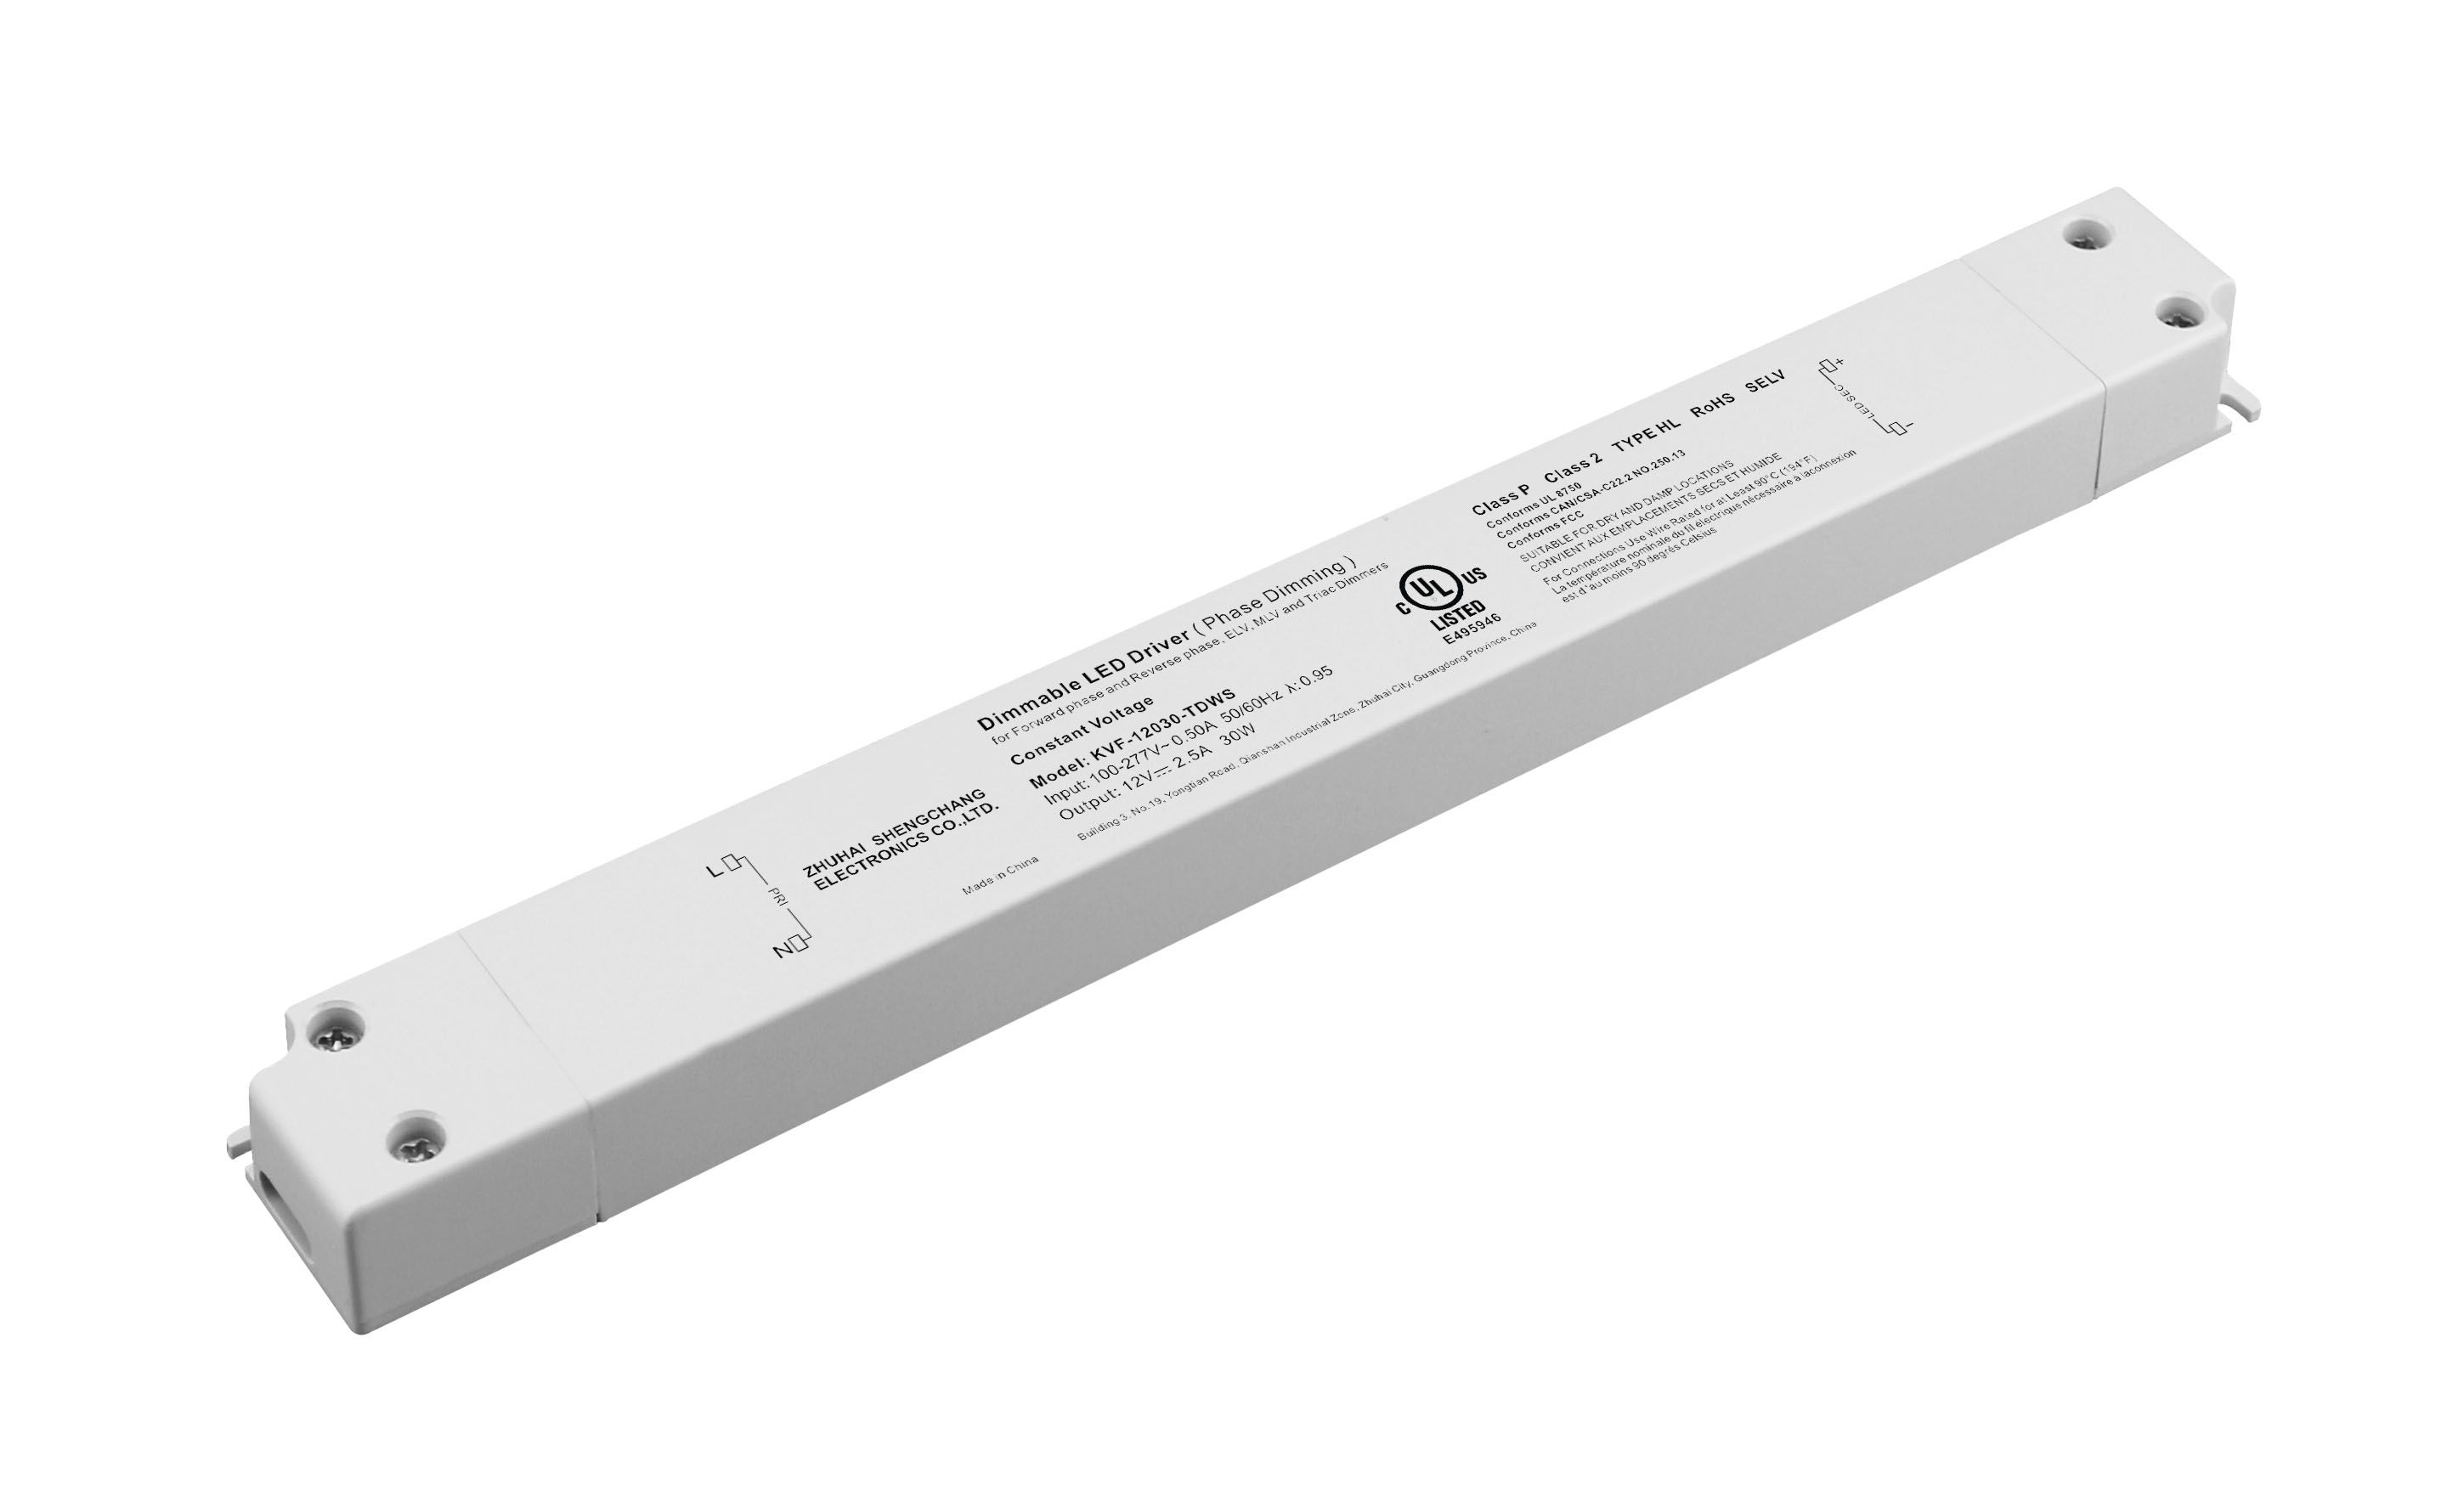 36W Constant Voltage Triac &0/1-10V Dimmable LED driver